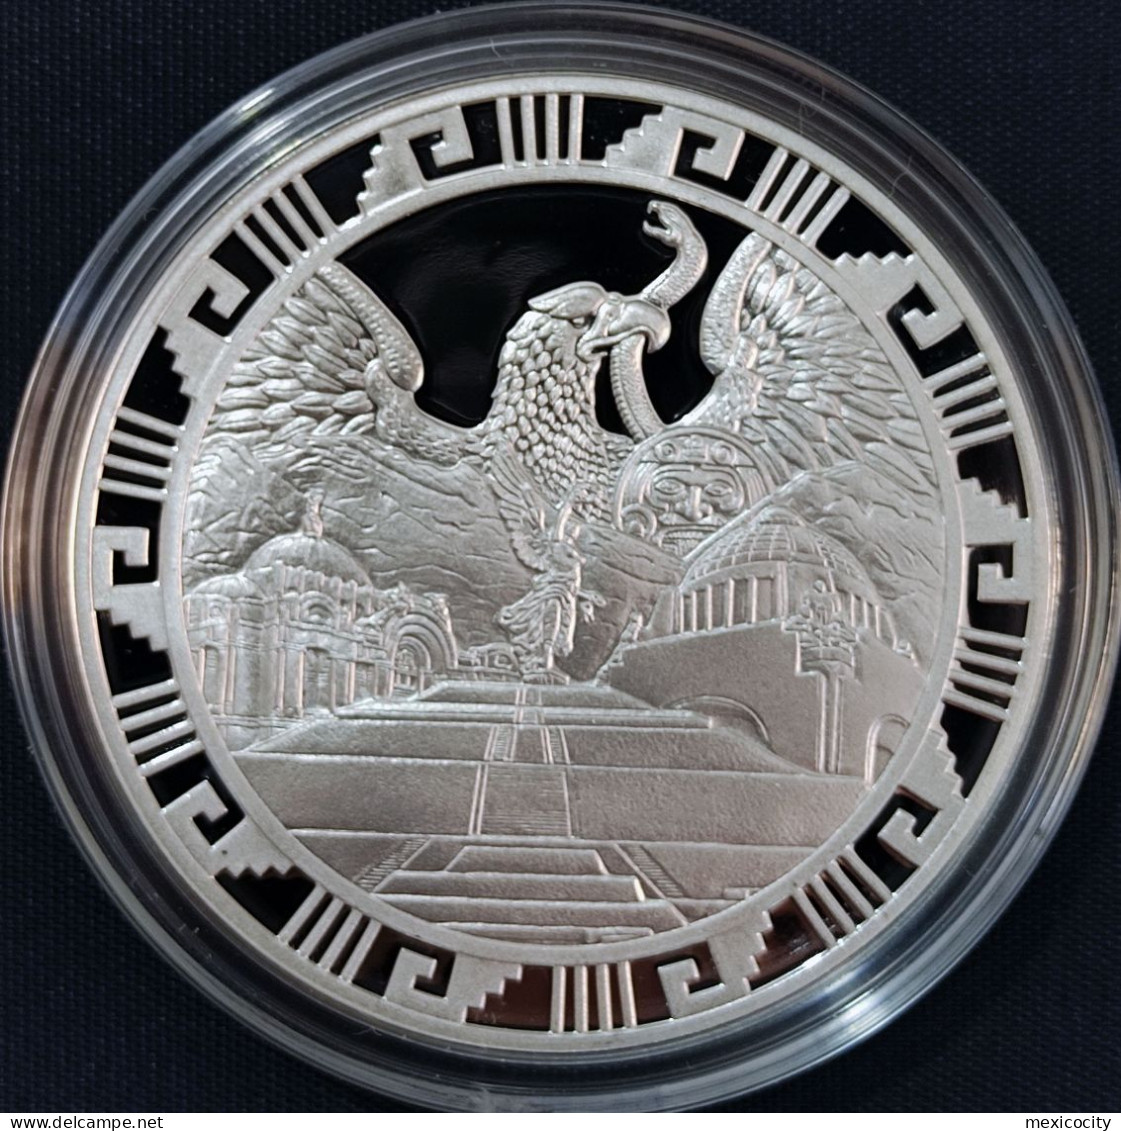 MEXICO Mint MEXICAN LANDSCAPE & WINGED VICTORY Deep Cameo Luxury .999 Silver Oz. PROOF Encapsulated - Mexico